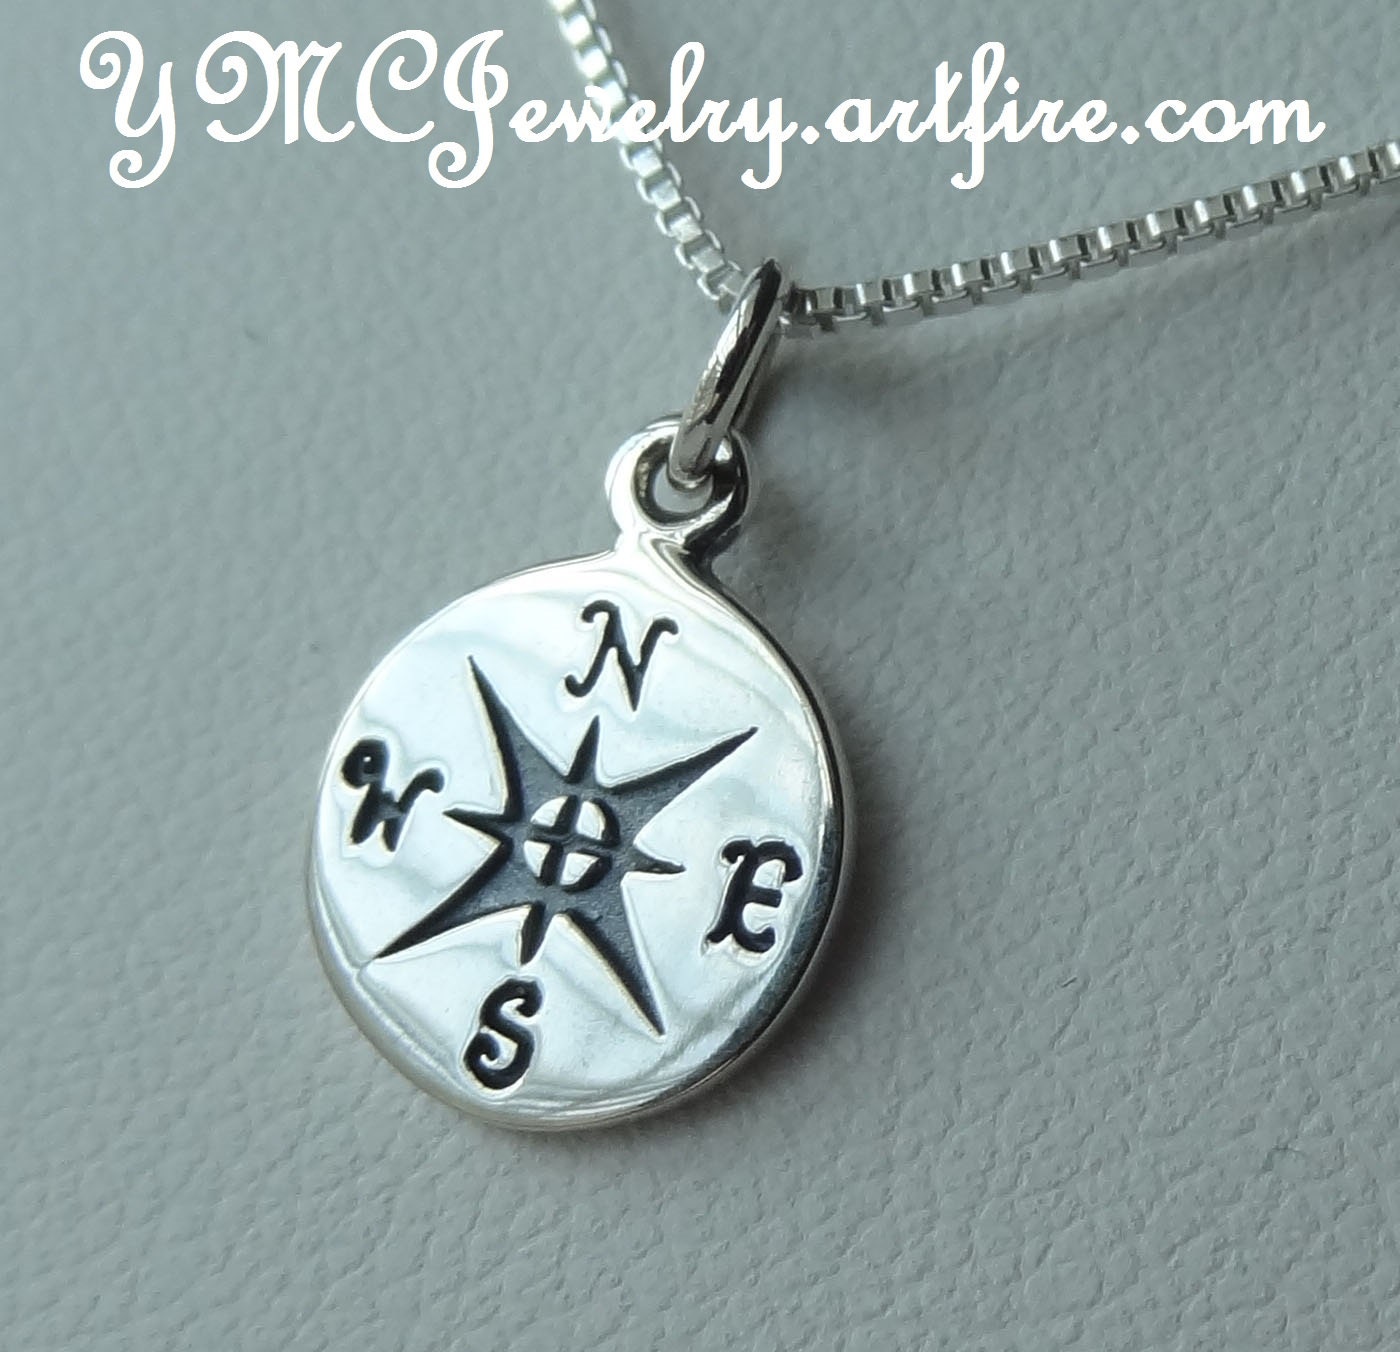 Compass Necklace, Sterling Silver Compas Necklace, Bridesmaids Gift Necklace, Best Friend Necklace,Travel Necklace, Small Compass Necklace